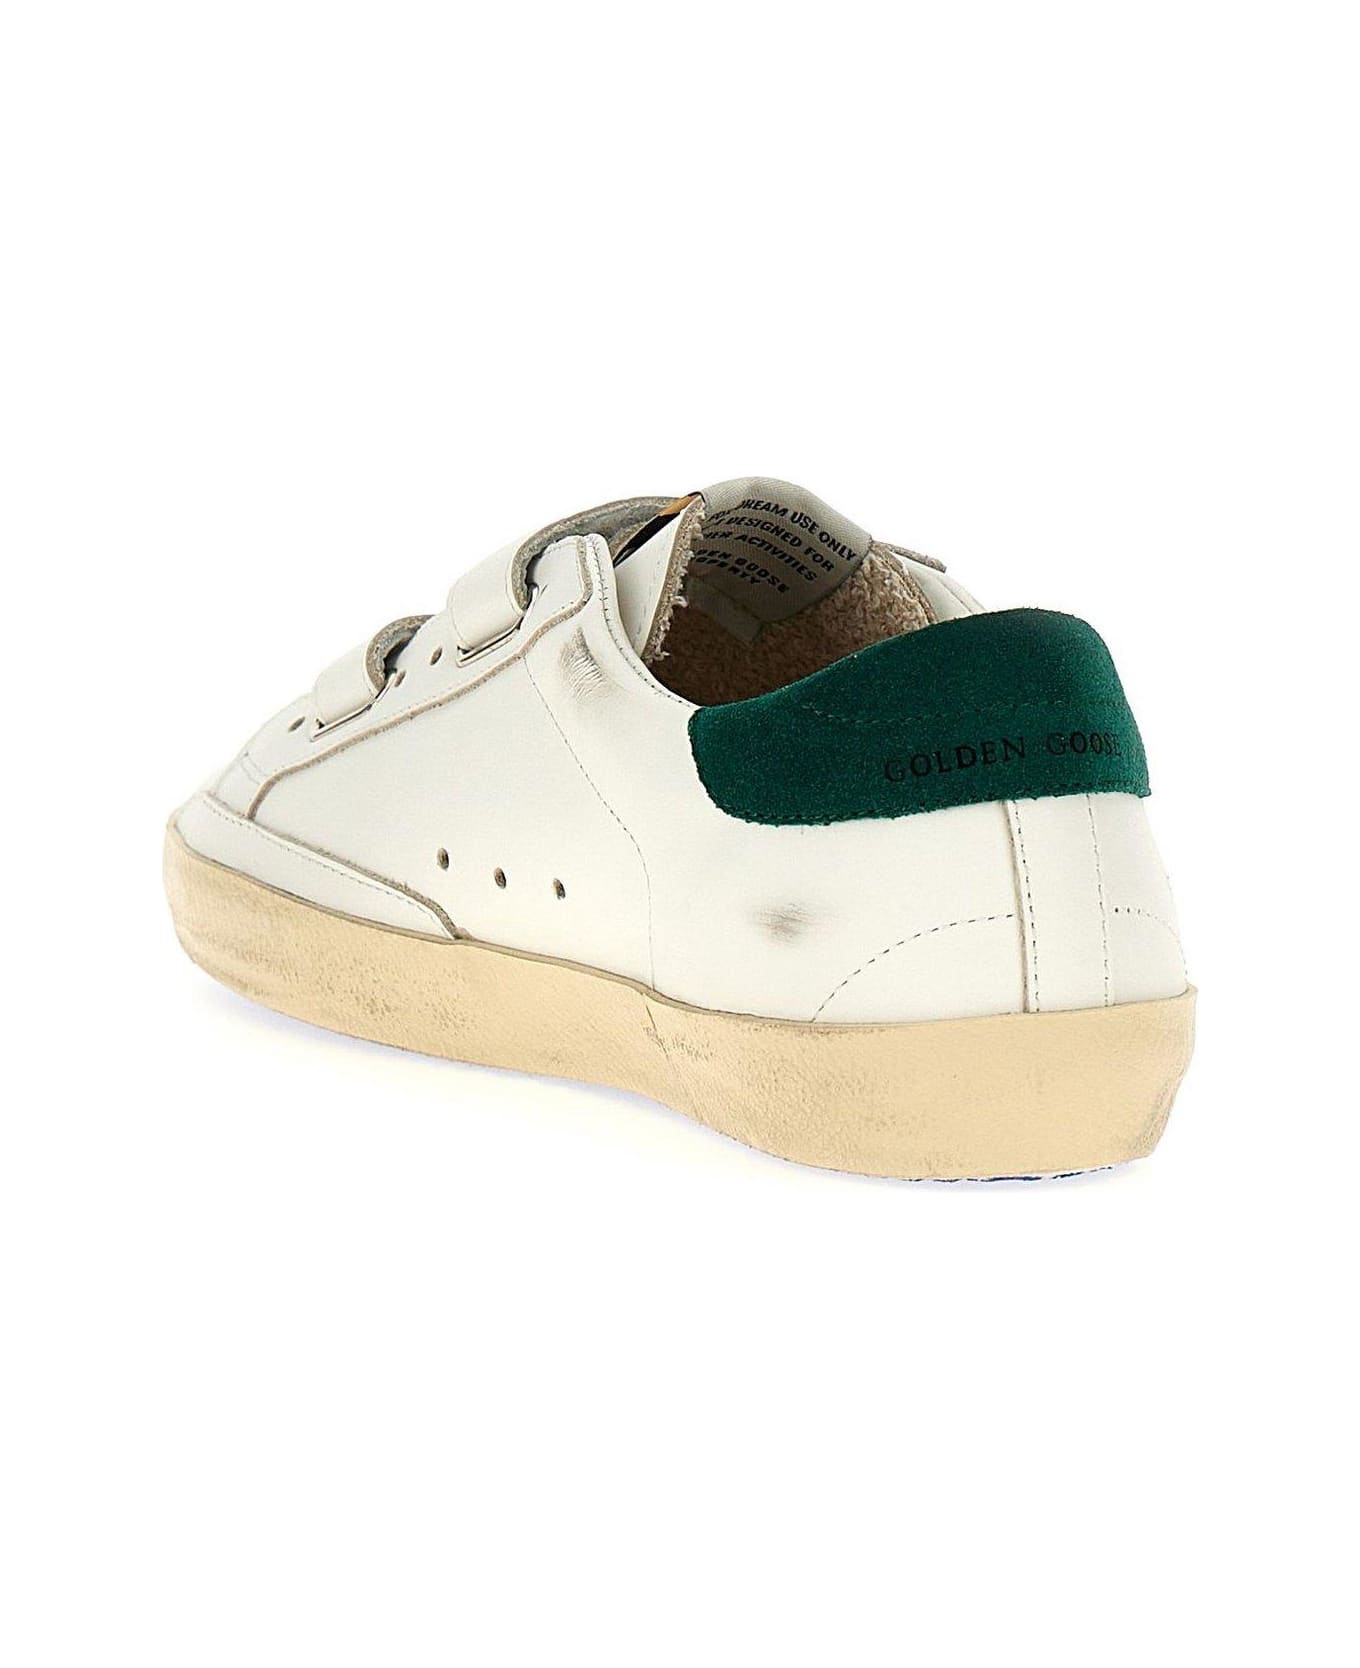 Golden Goose Old School Star Patch Sneakers - WHITE/GREEN シューズ